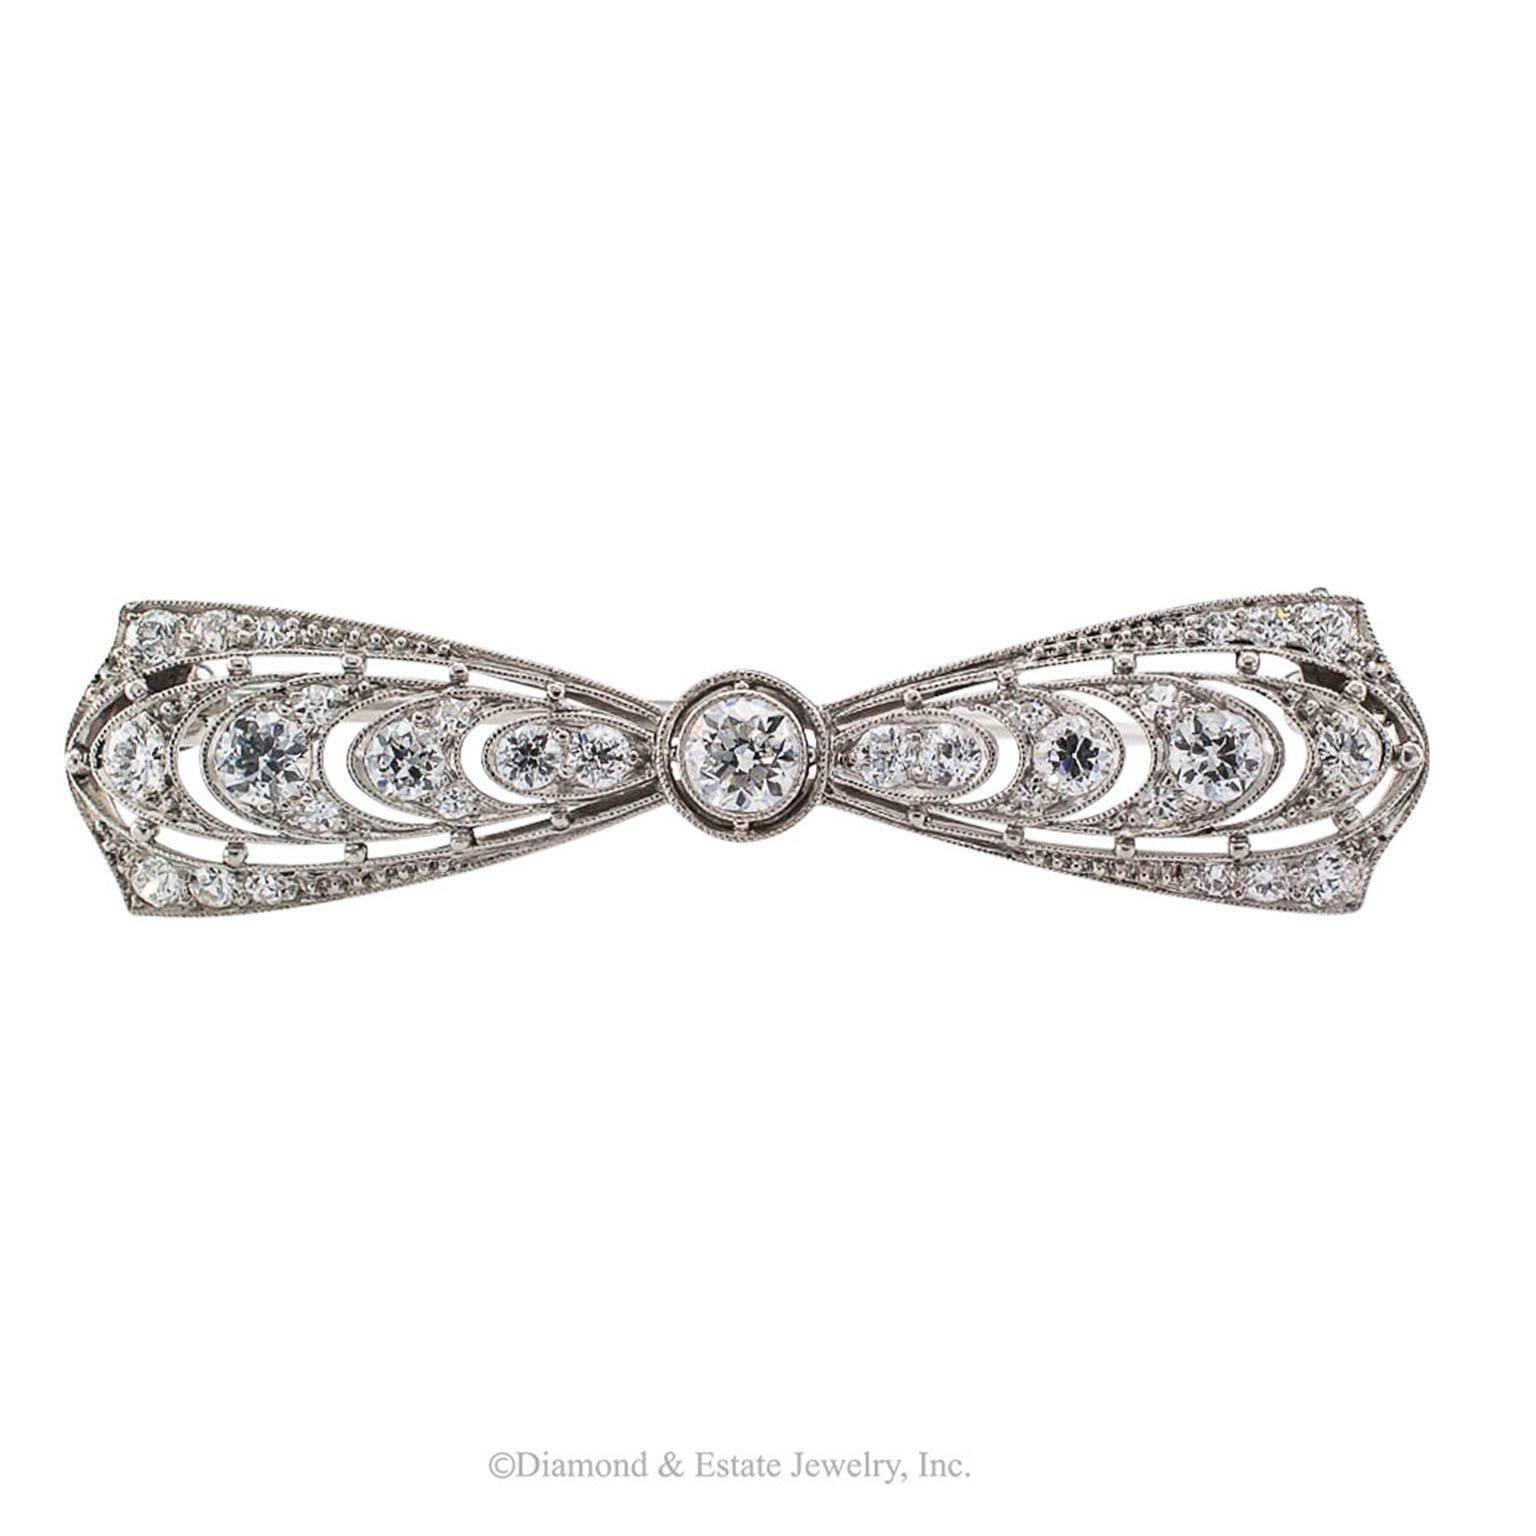 T B Starr Edwardian Diamond Platinum Bow Brooch

T B Starr Edwardian diamond and platinum bow brooch circa 1910.  Designed as a bow centering an old-cut diamond flanked by outwardly graduating similarly cut diamonds, on a platinum mounting that is a